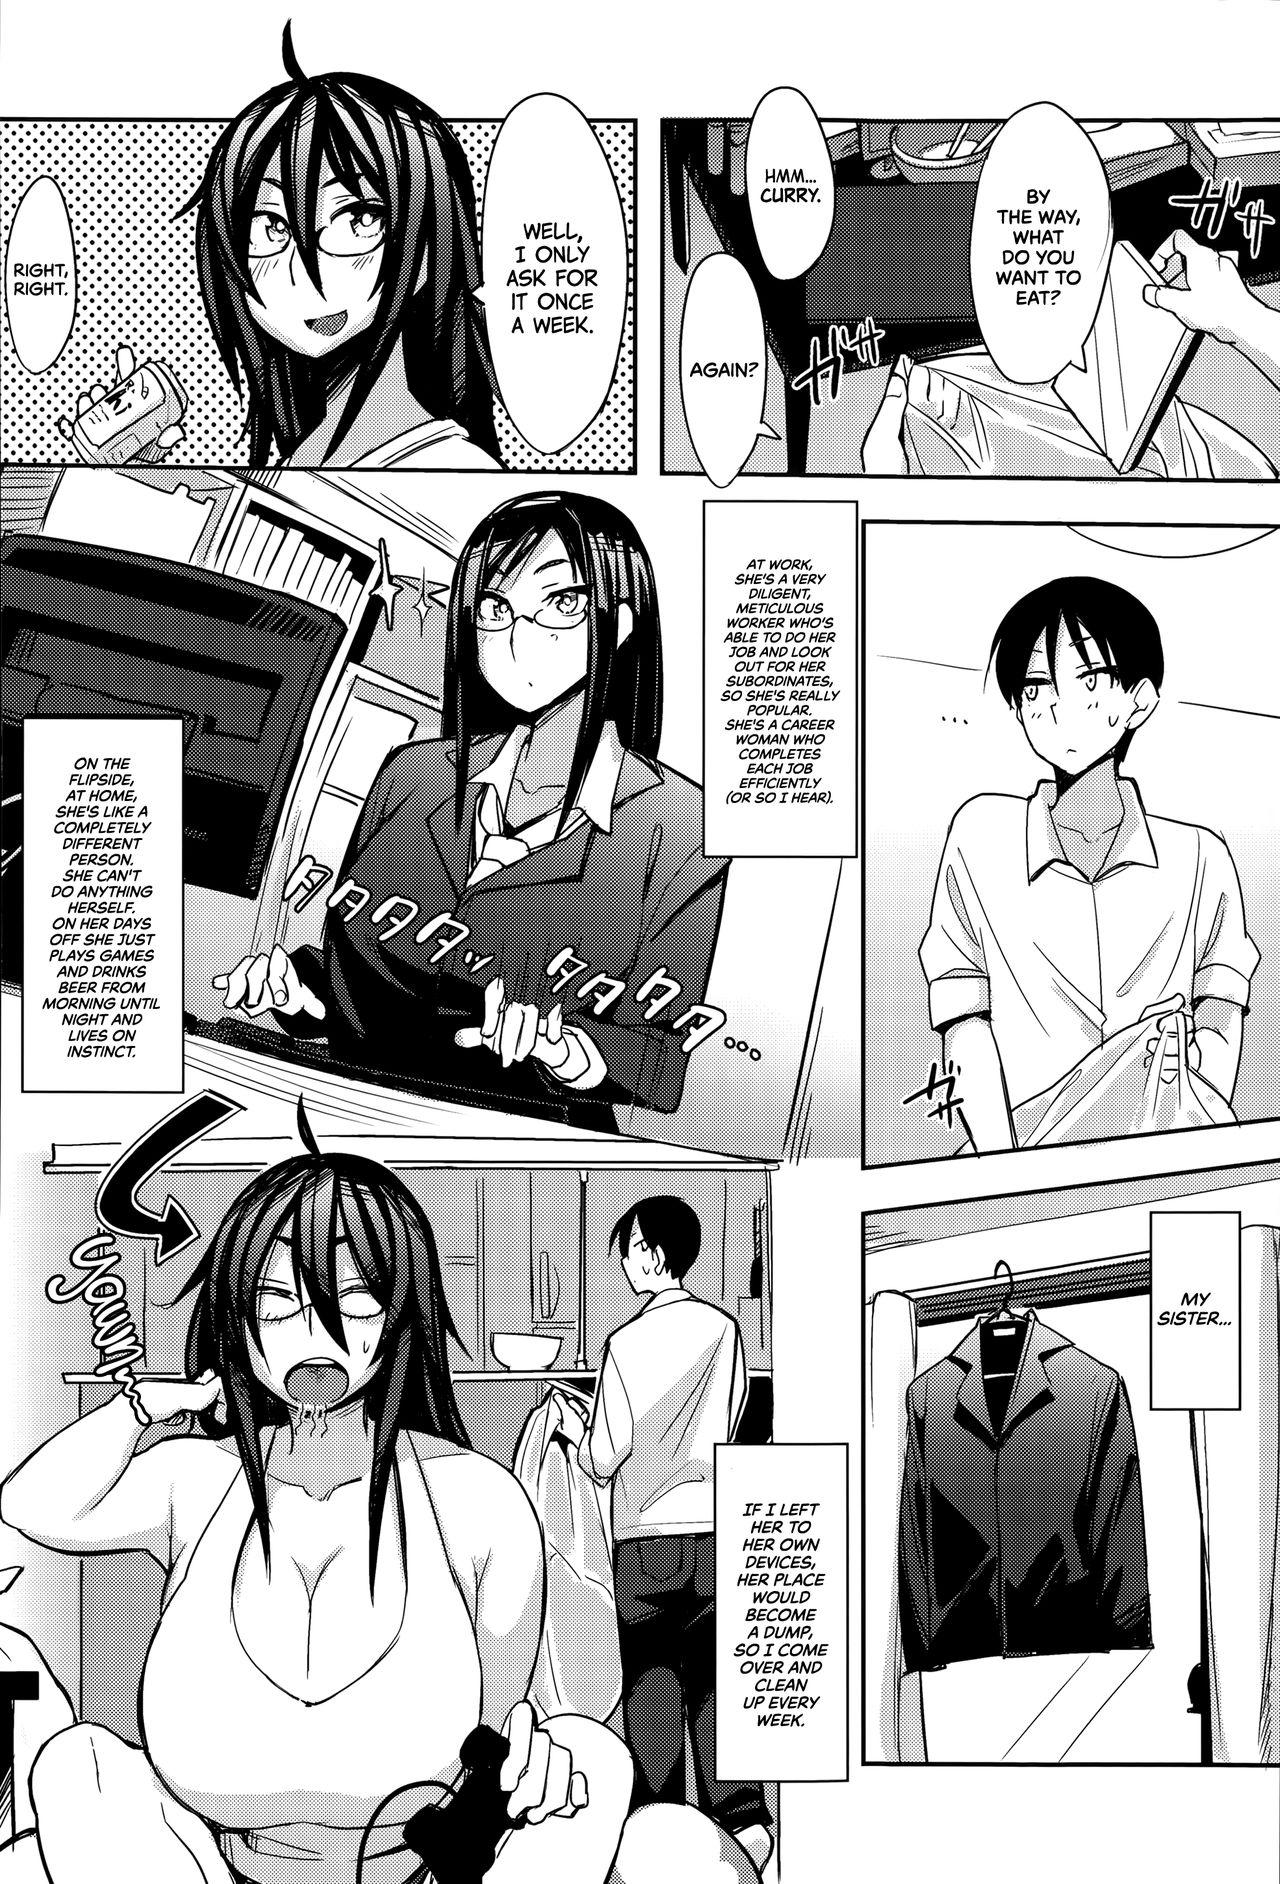 Pornstar Onee-chan no Uragao | My Sister's Other Side POV - Page 2